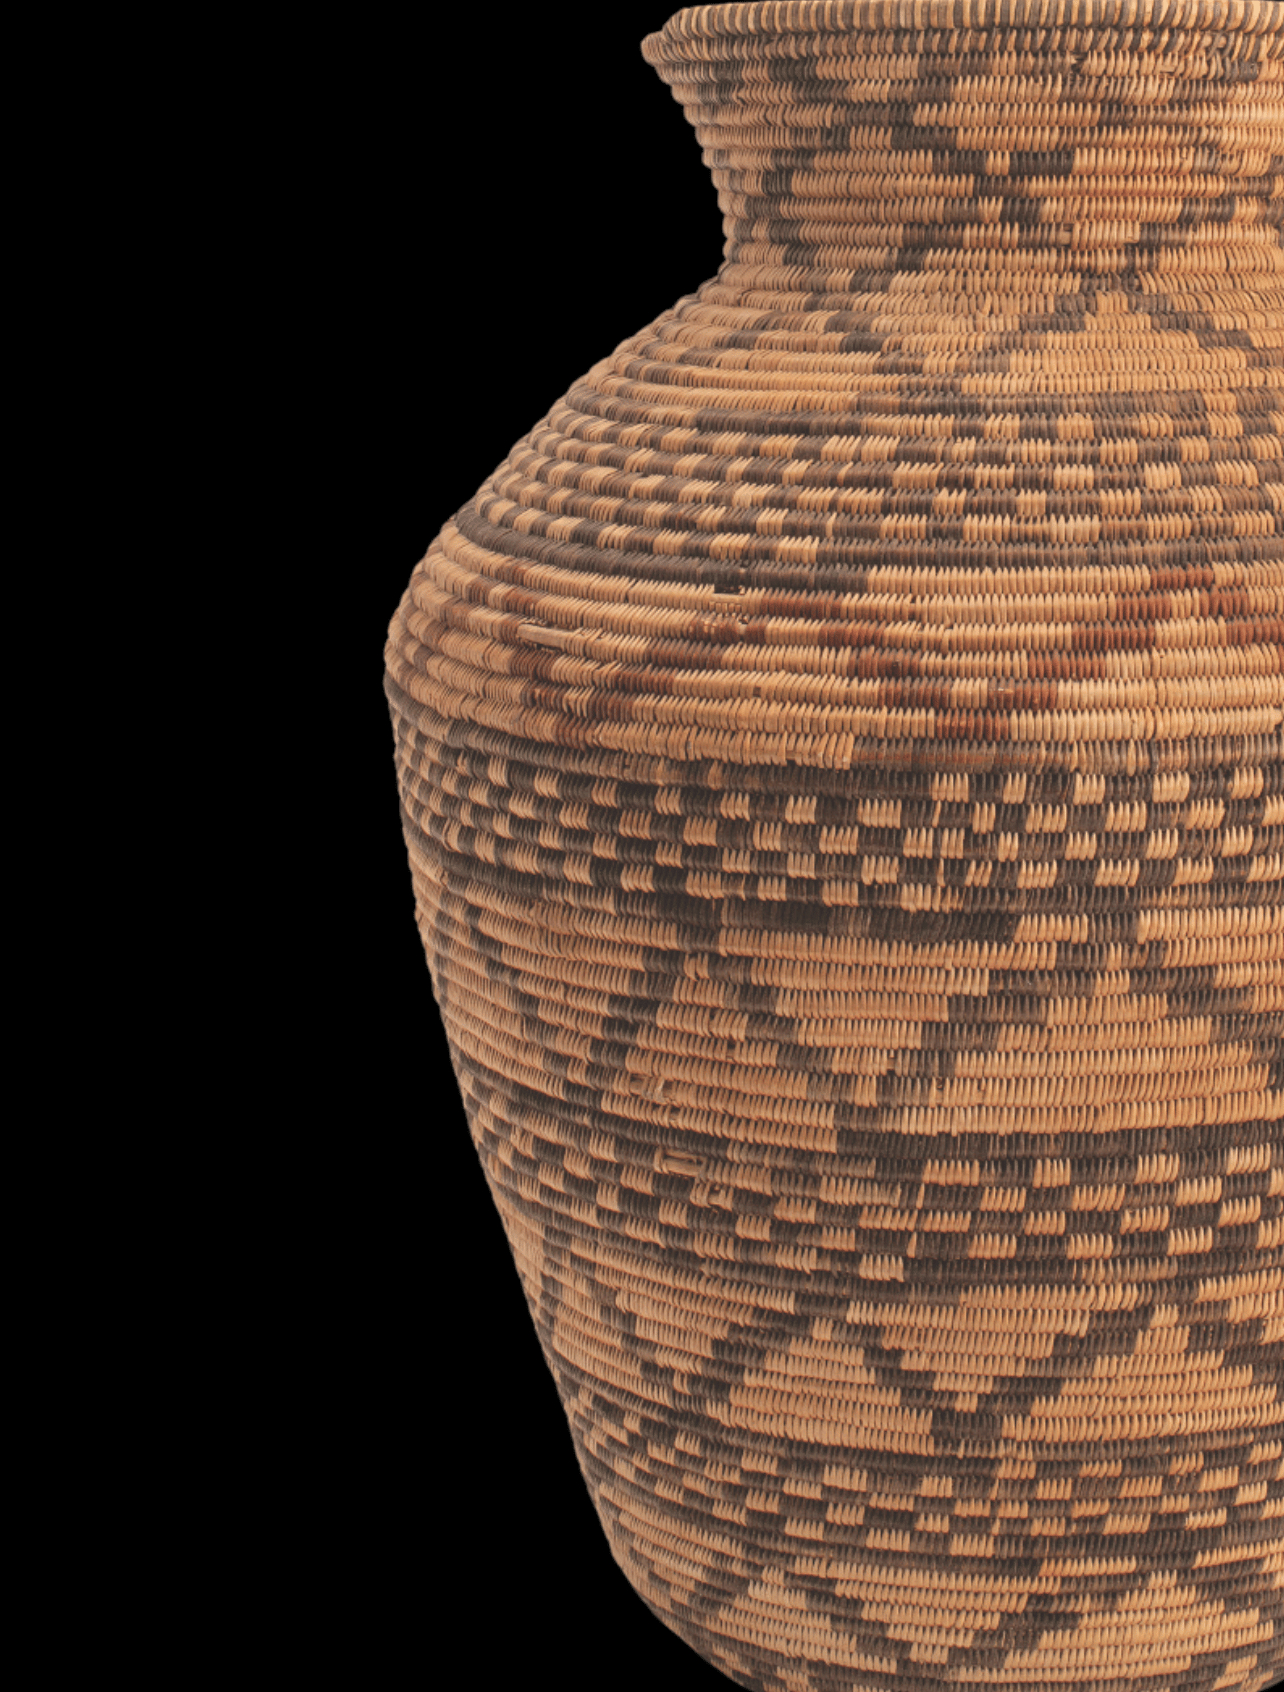 A woven basket on a black background.